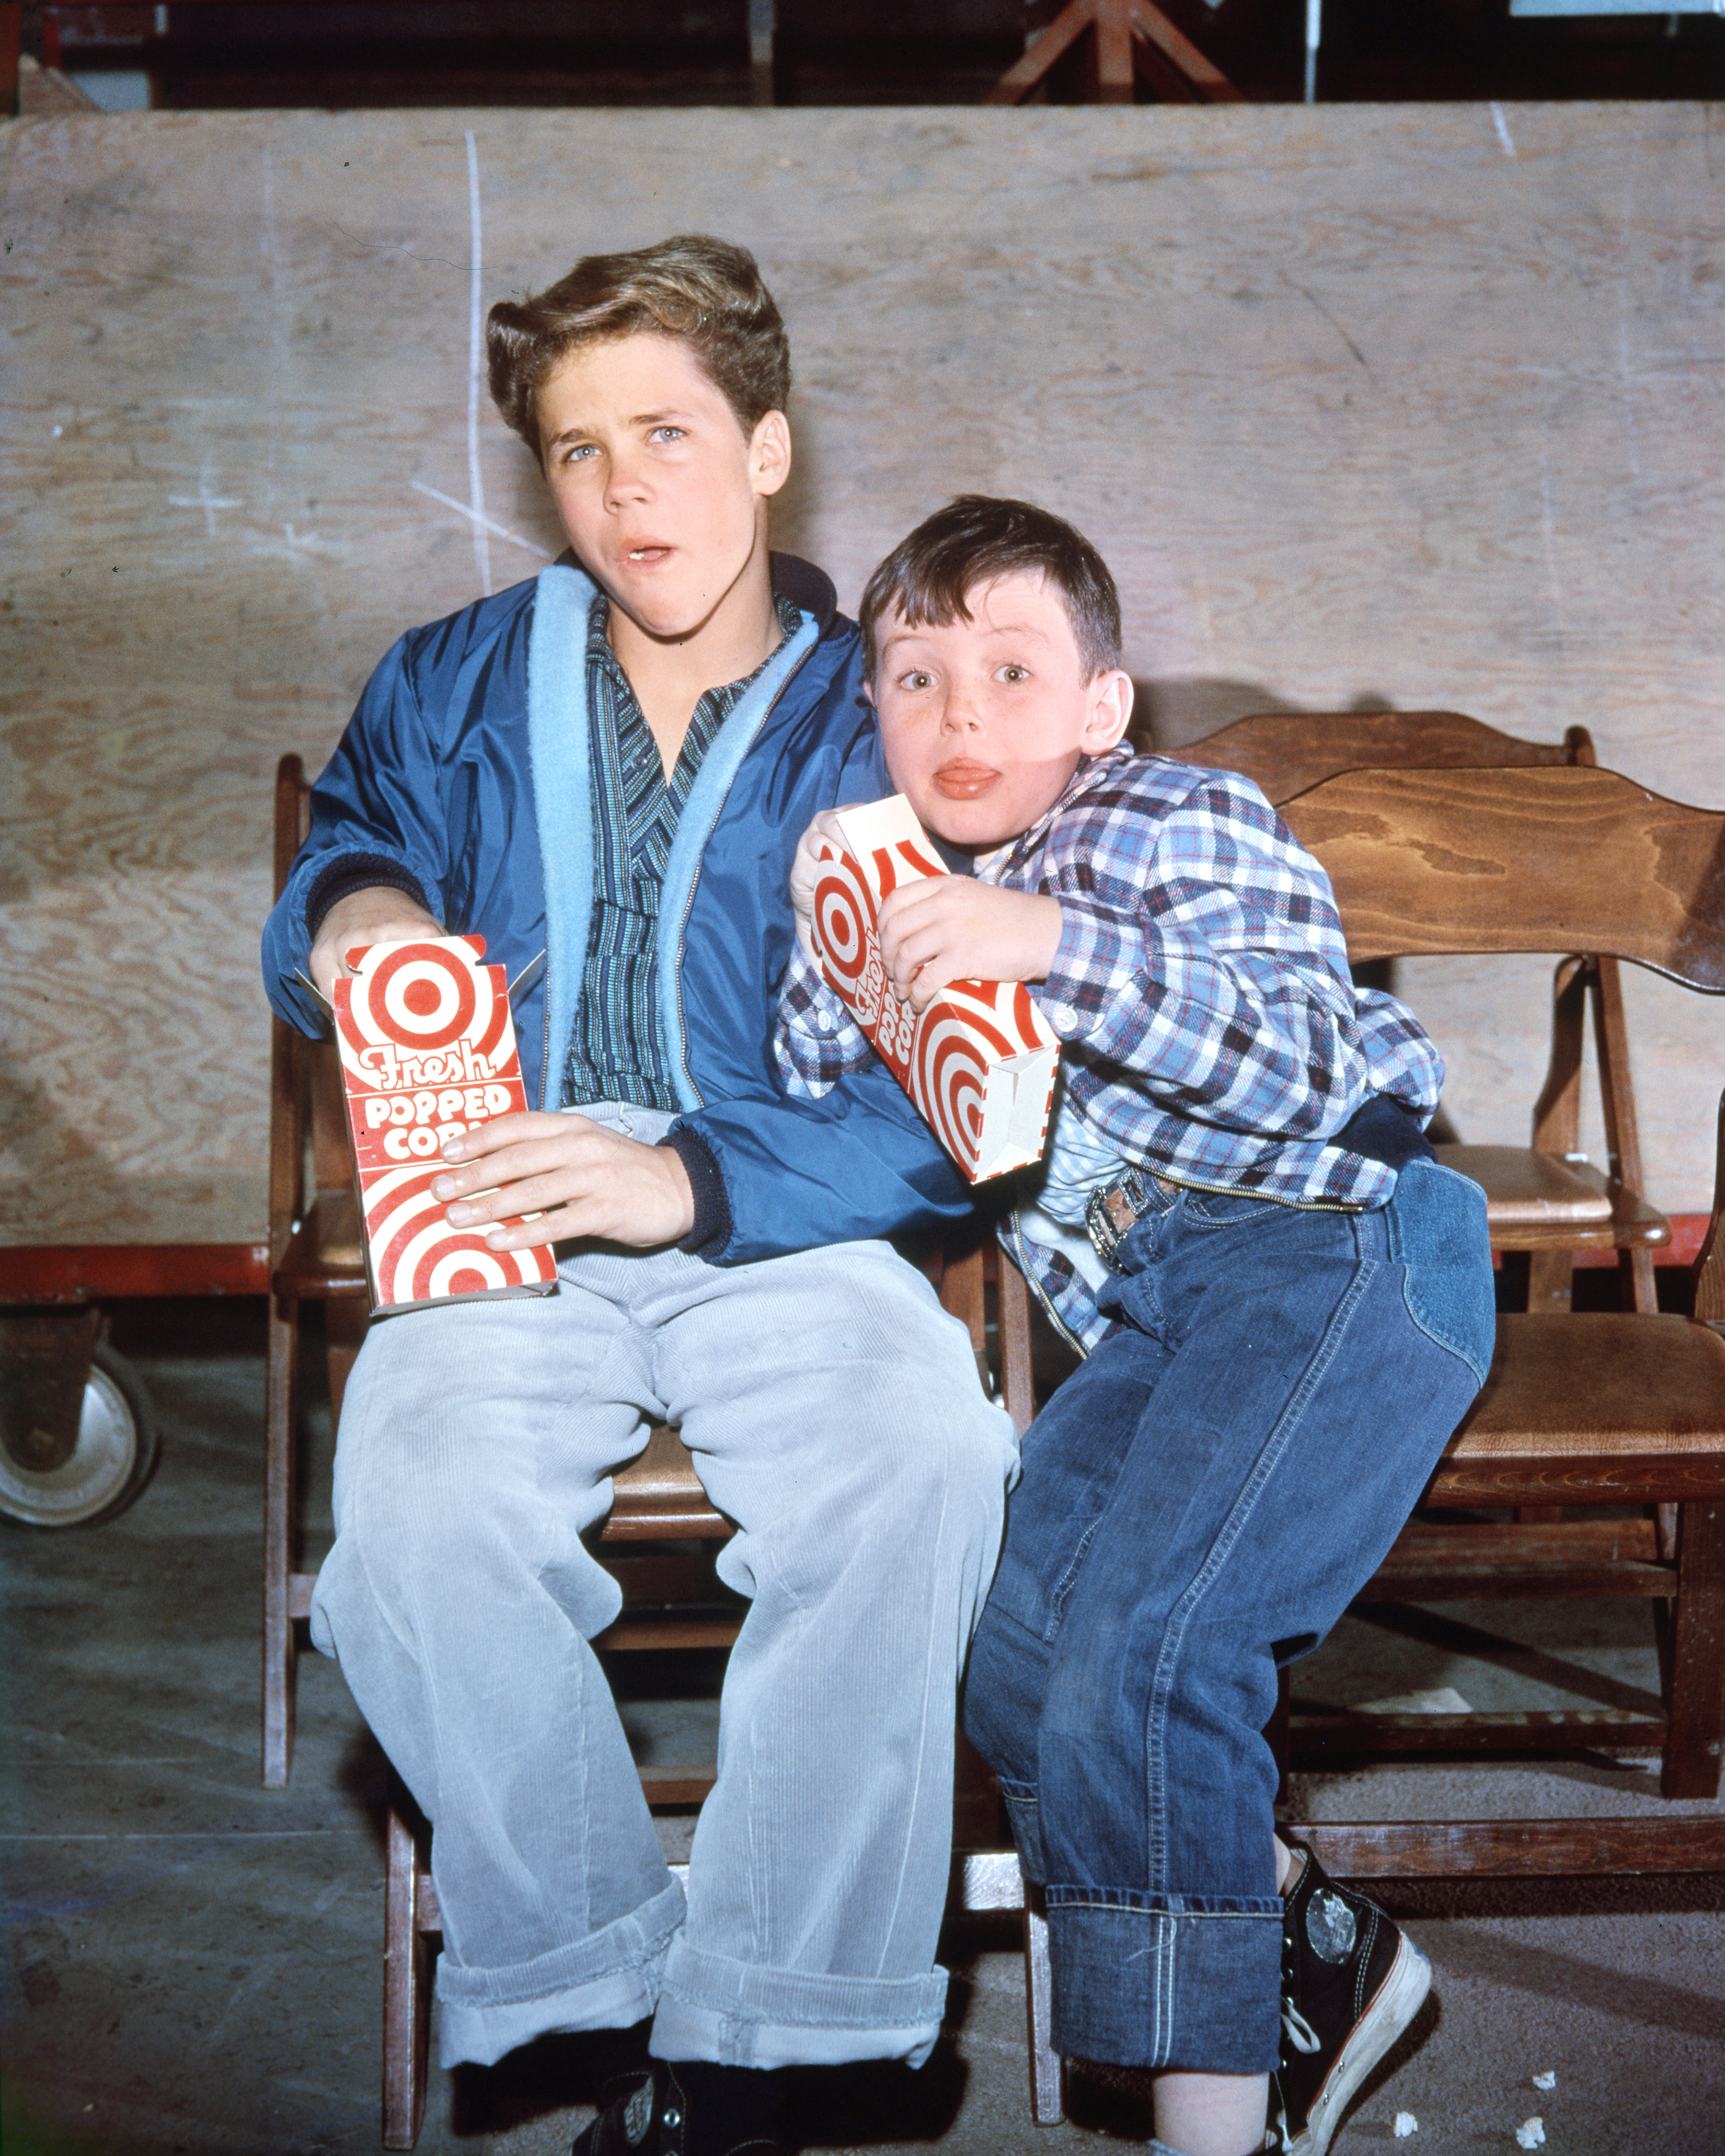 Tony Dow and Jerry Mathers promotional portrait for “Leave It to Beaver” in 1960 | Source: Getty Images